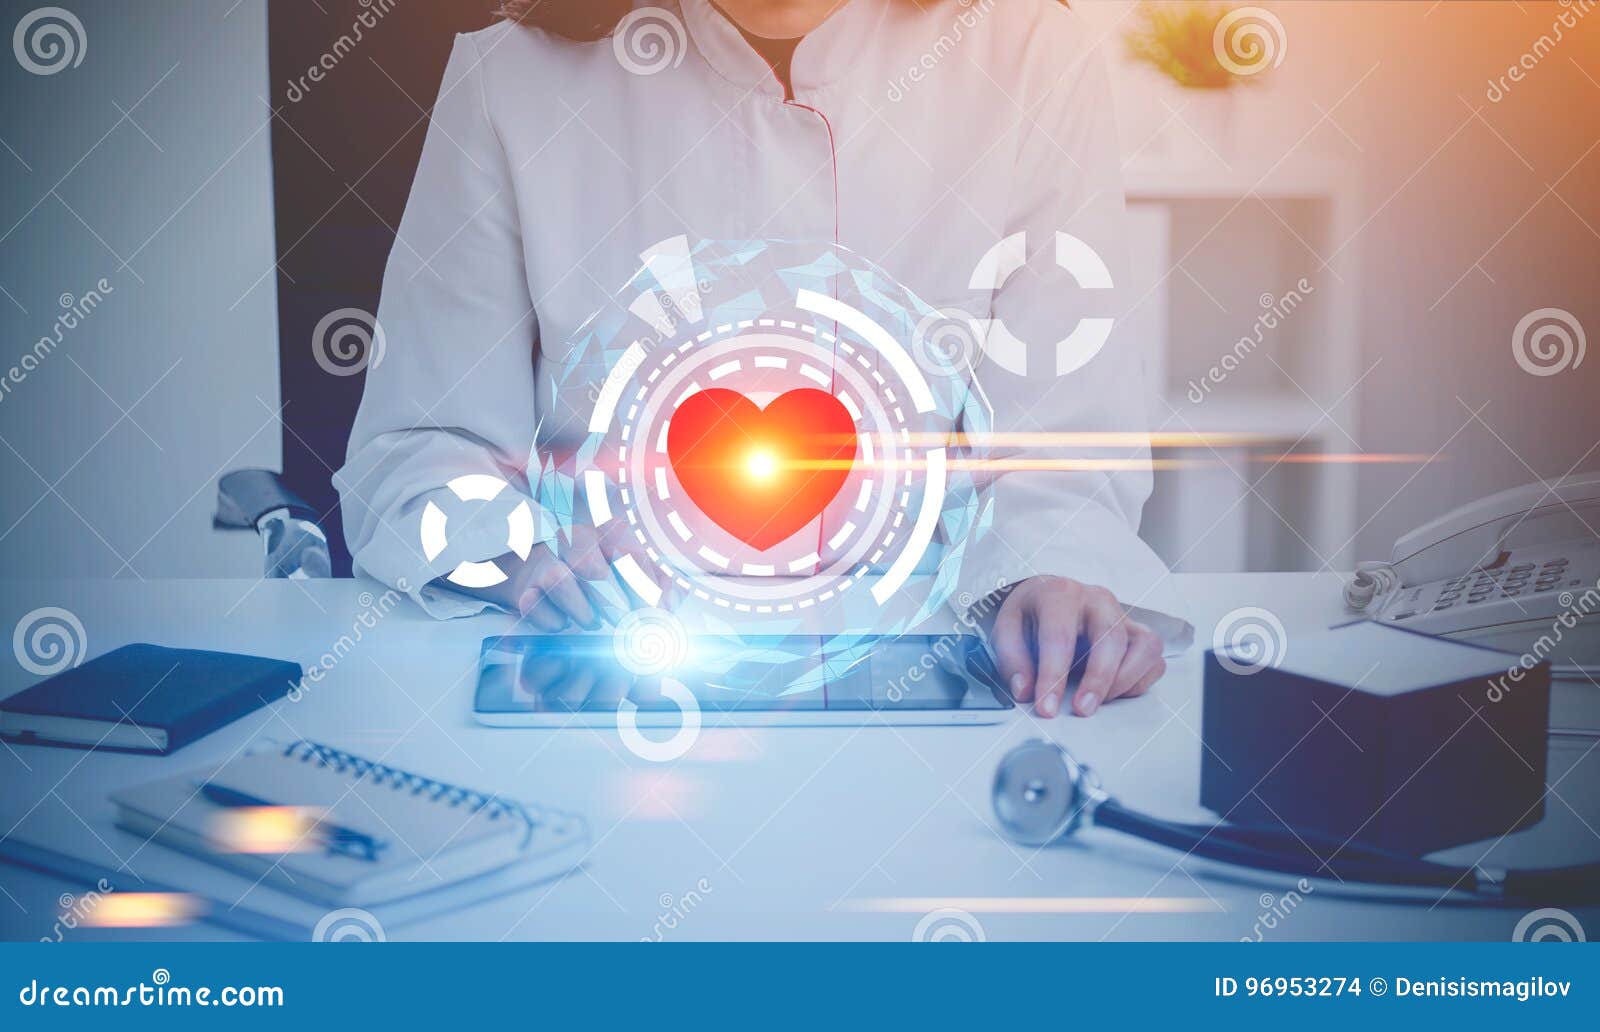 Woman Doctor Office Heart Hud Stock Photo Image Of Hospital